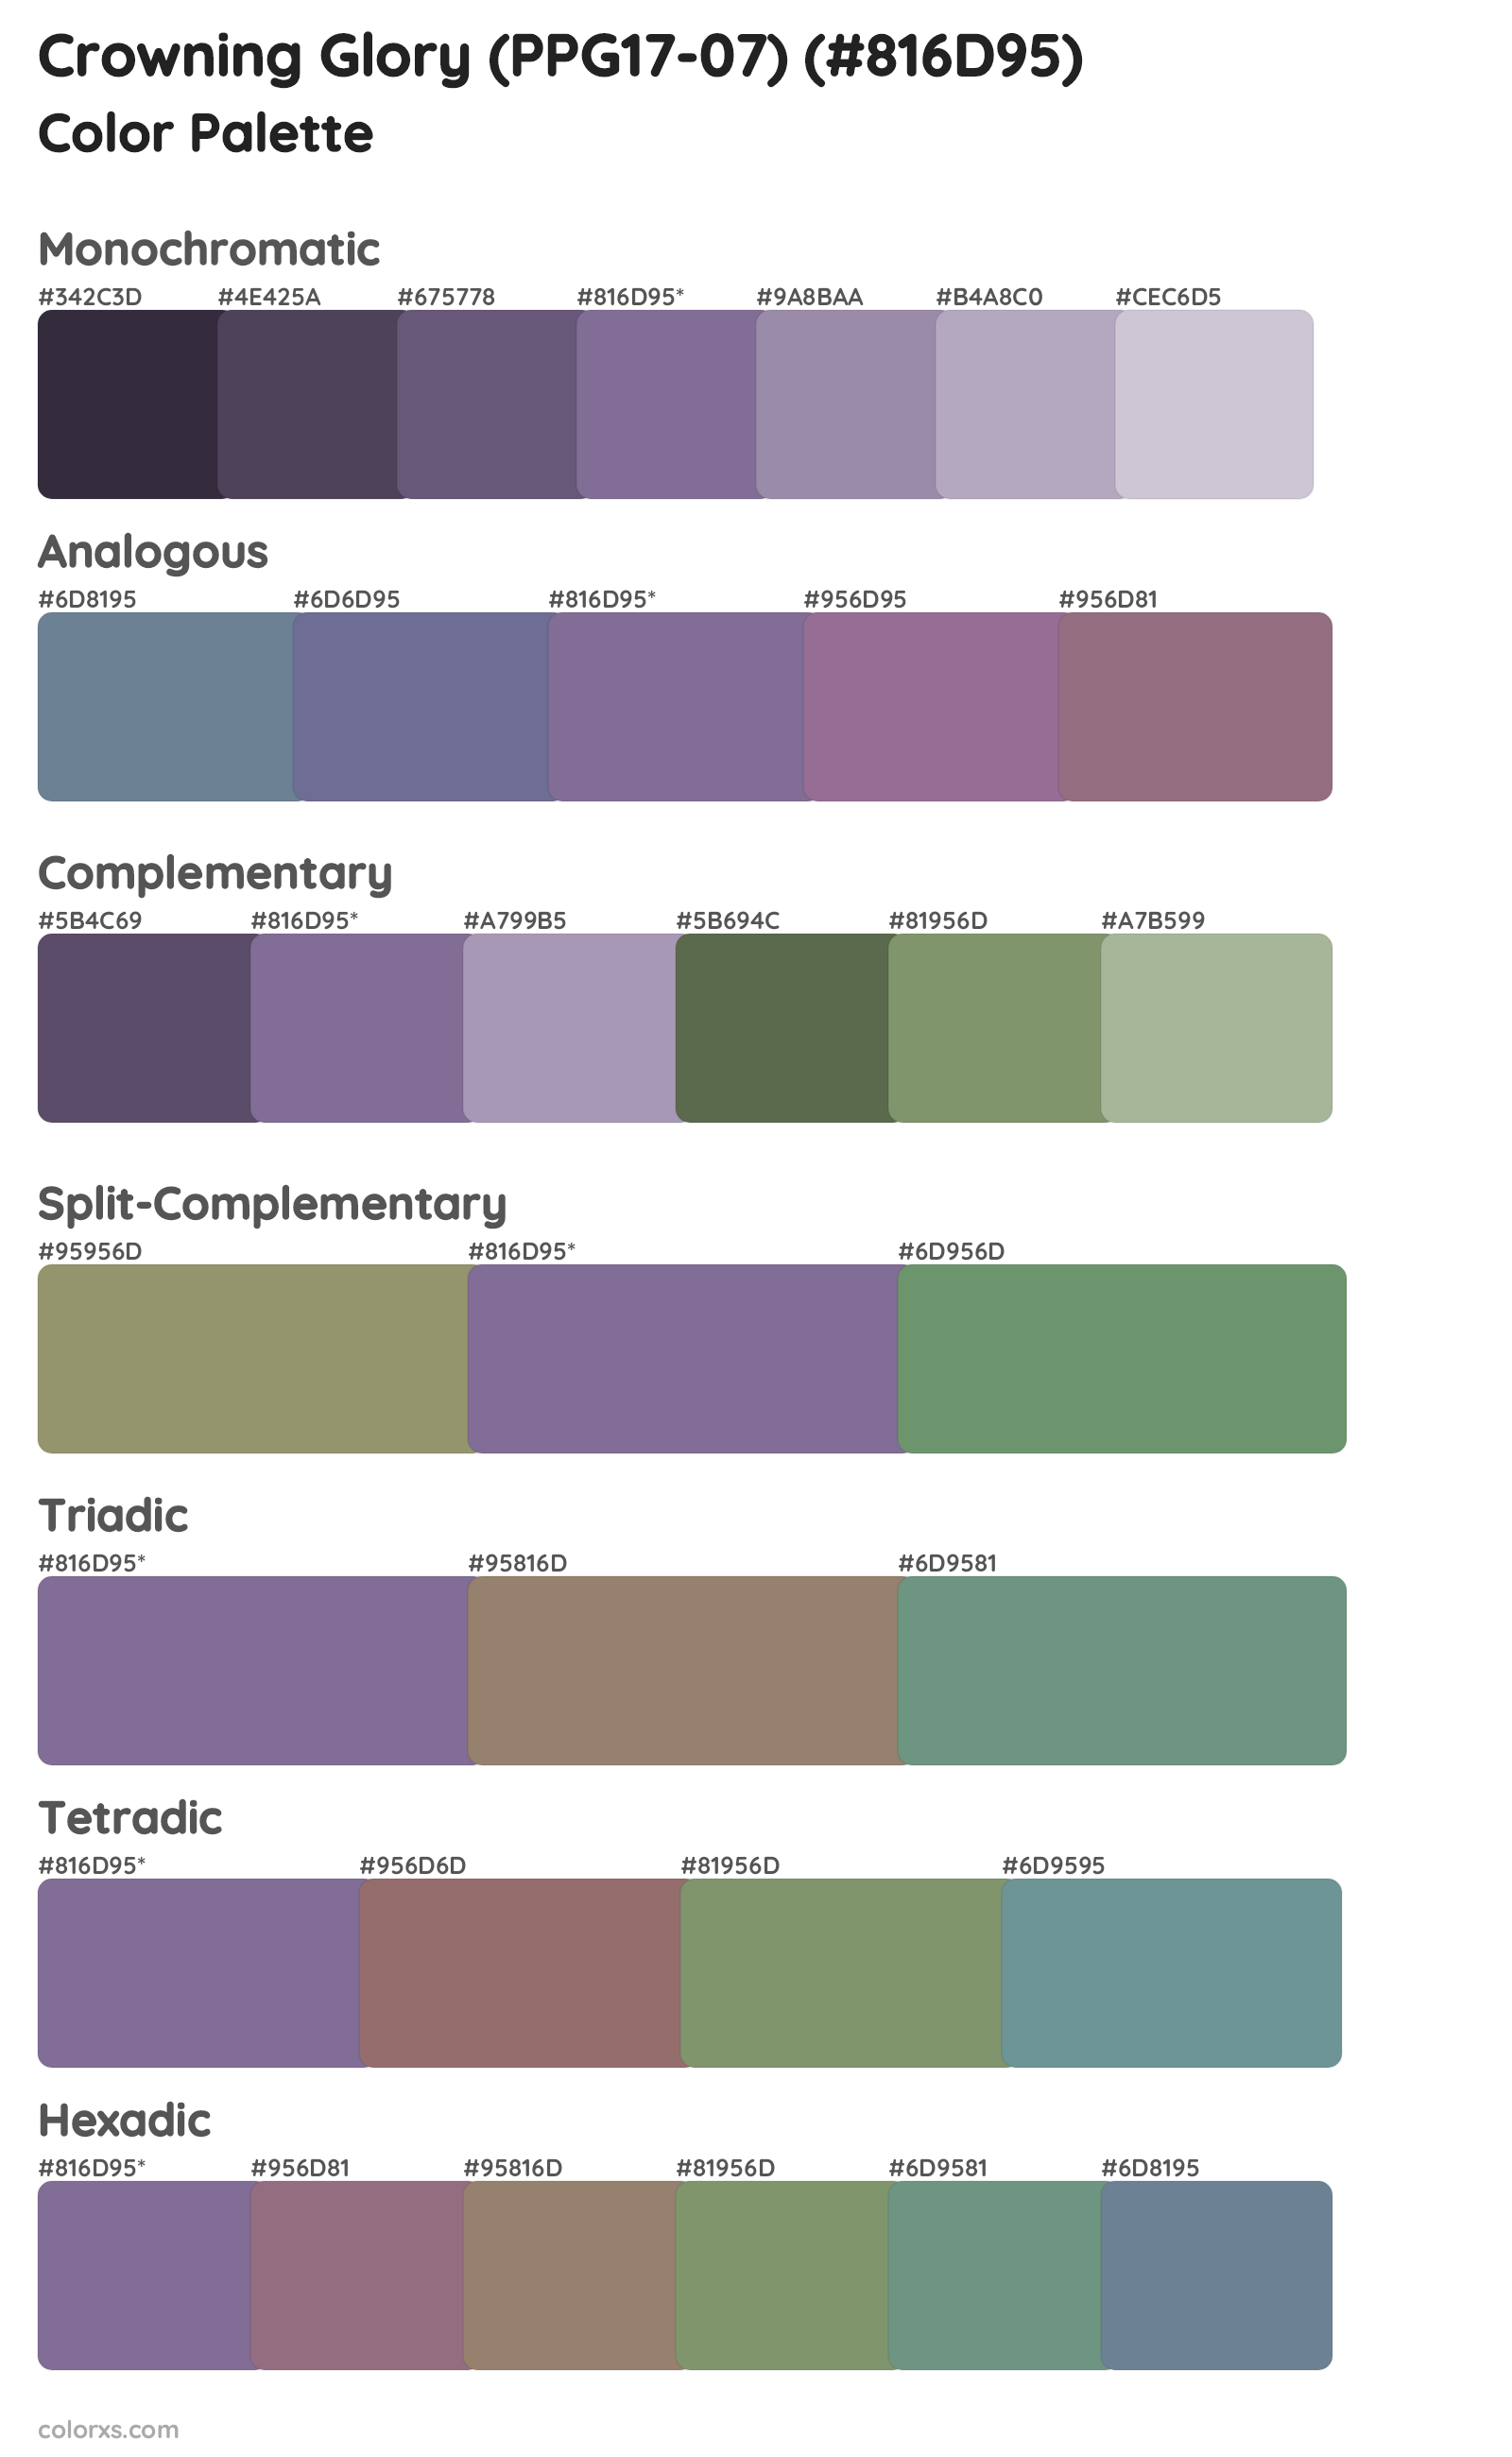 Crowning Glory (PPG17-07) Color Scheme Palettes